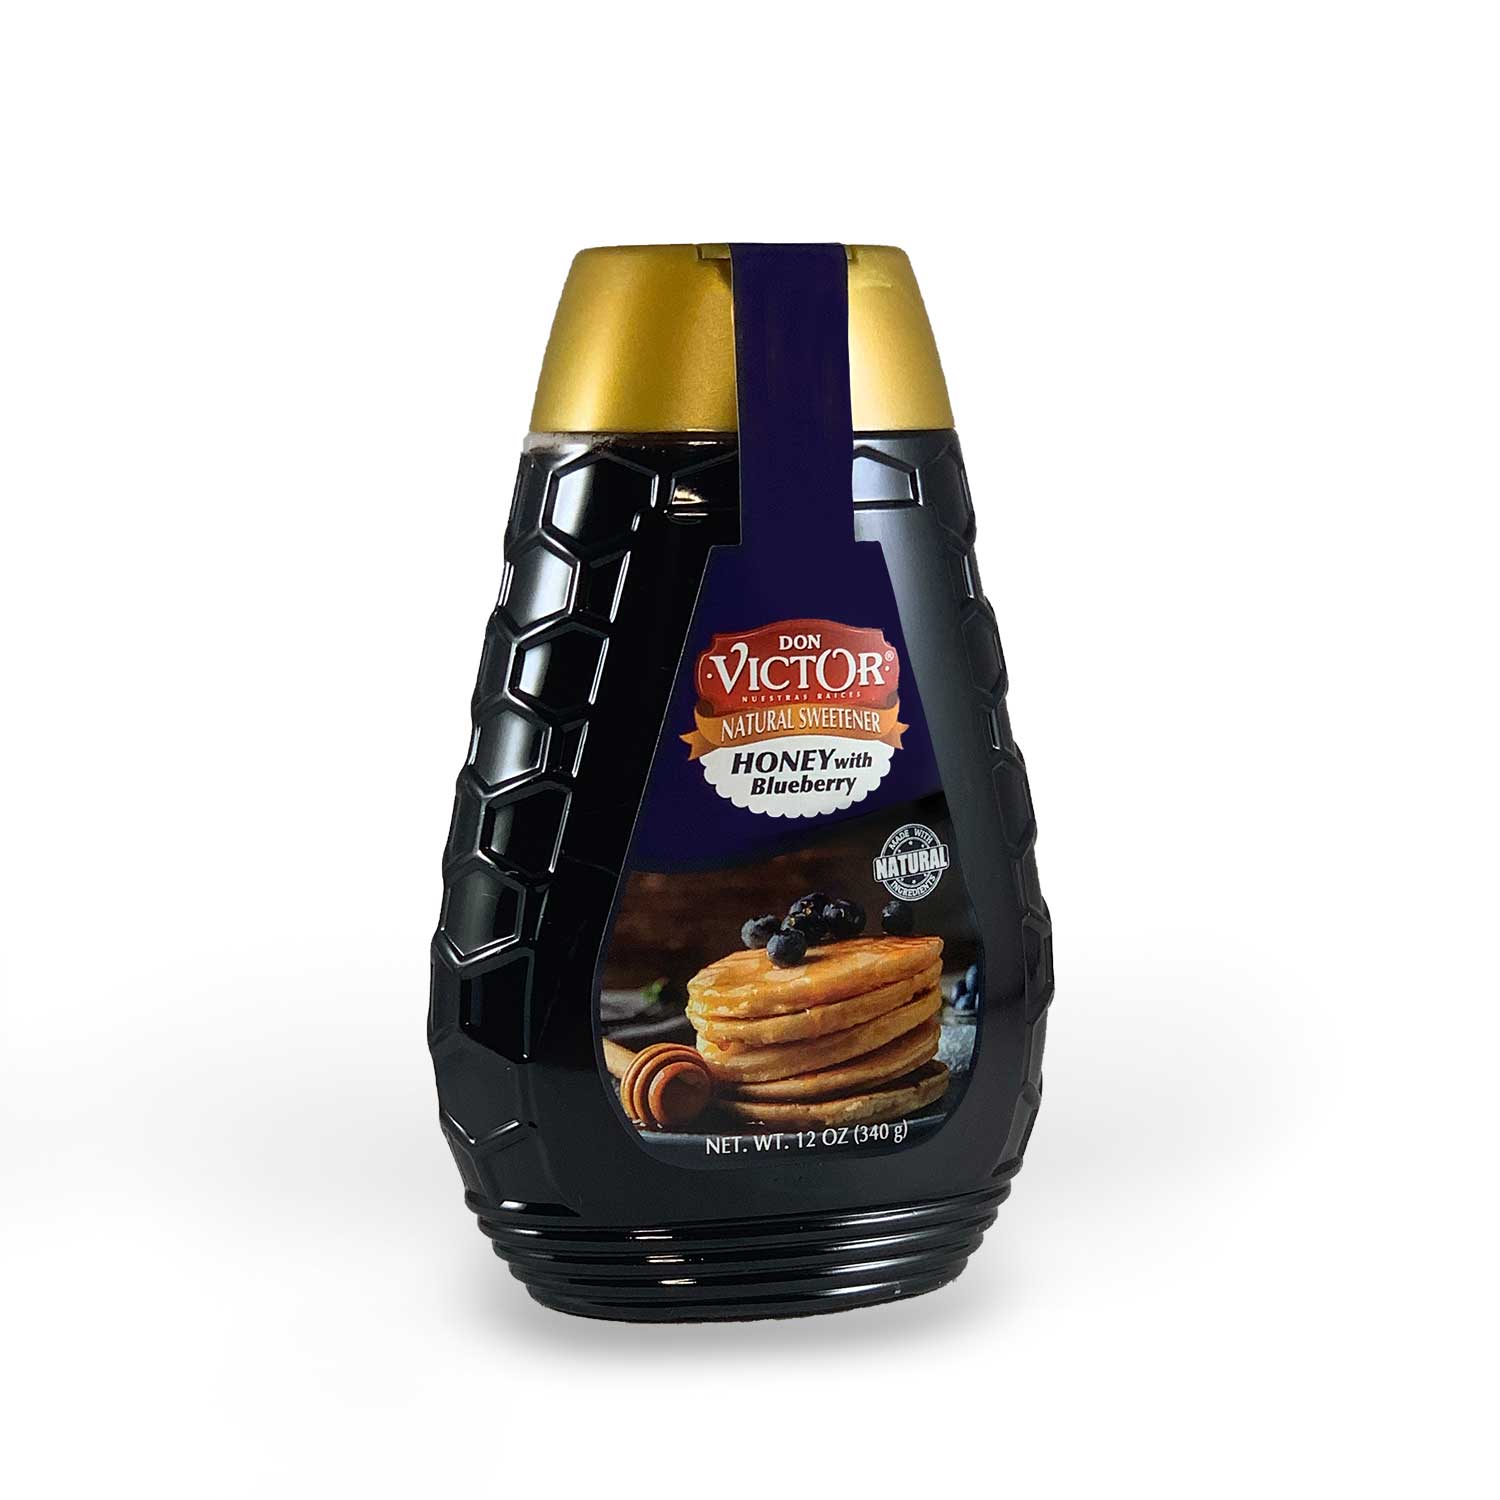 Bottle of Don Victor's blueberry flavored honey, perfect for topping pancakes or hot tea.